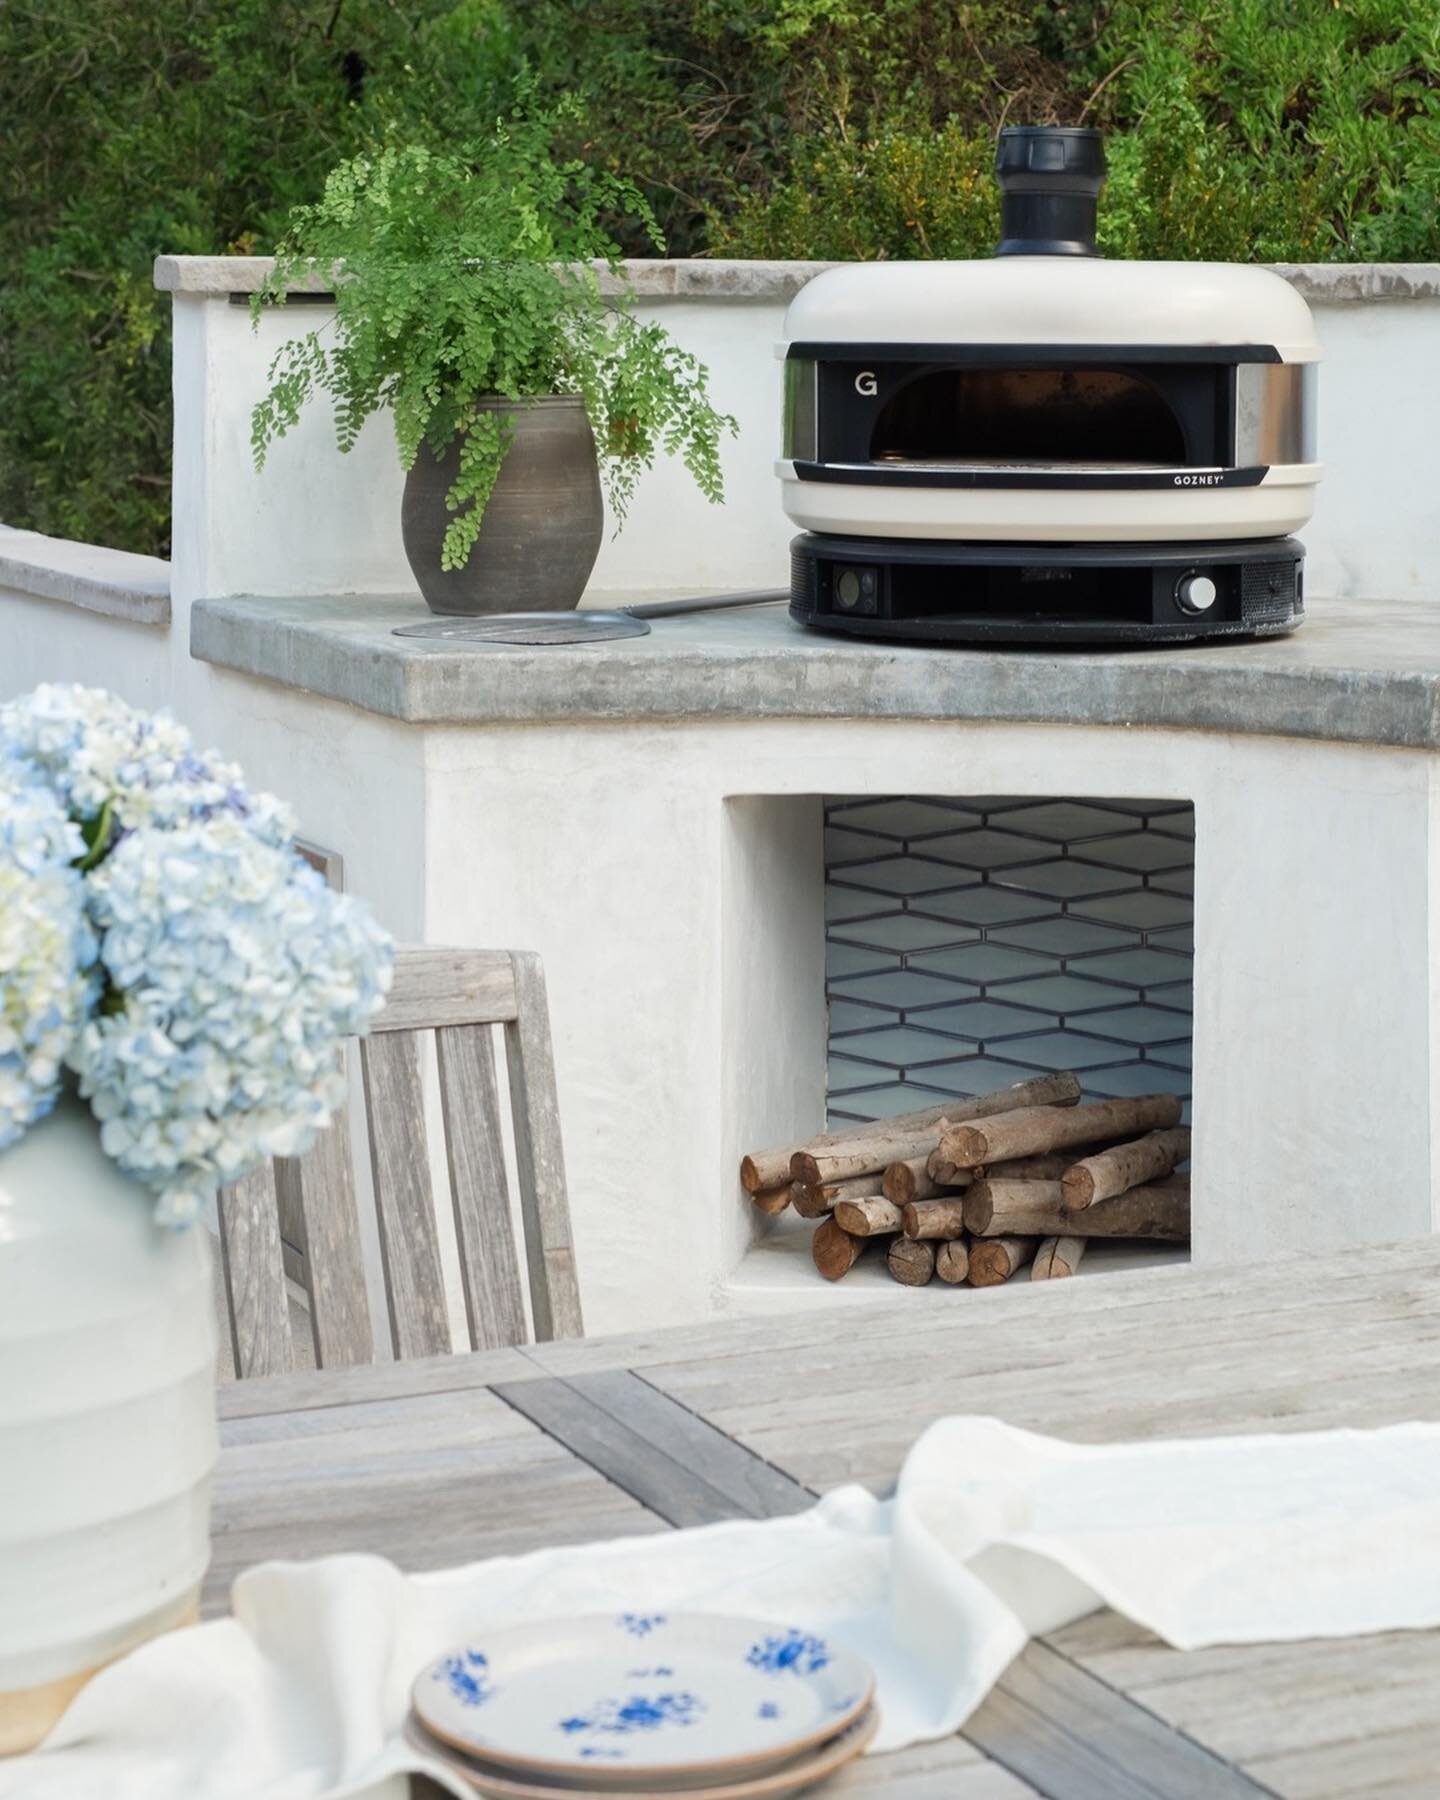 Yay! It&rsquo;s Friday! What says Friday more than a pizza oven? 
Perfect exterior dining moment at the La Jolla Project with @coatinc in partnership with A Designed Space. 
⠀⠀⠀⠀⠀⠀⠀⠀⠀
#furnituredesigner #interiorstyling #interiorstylist #interiorstyl